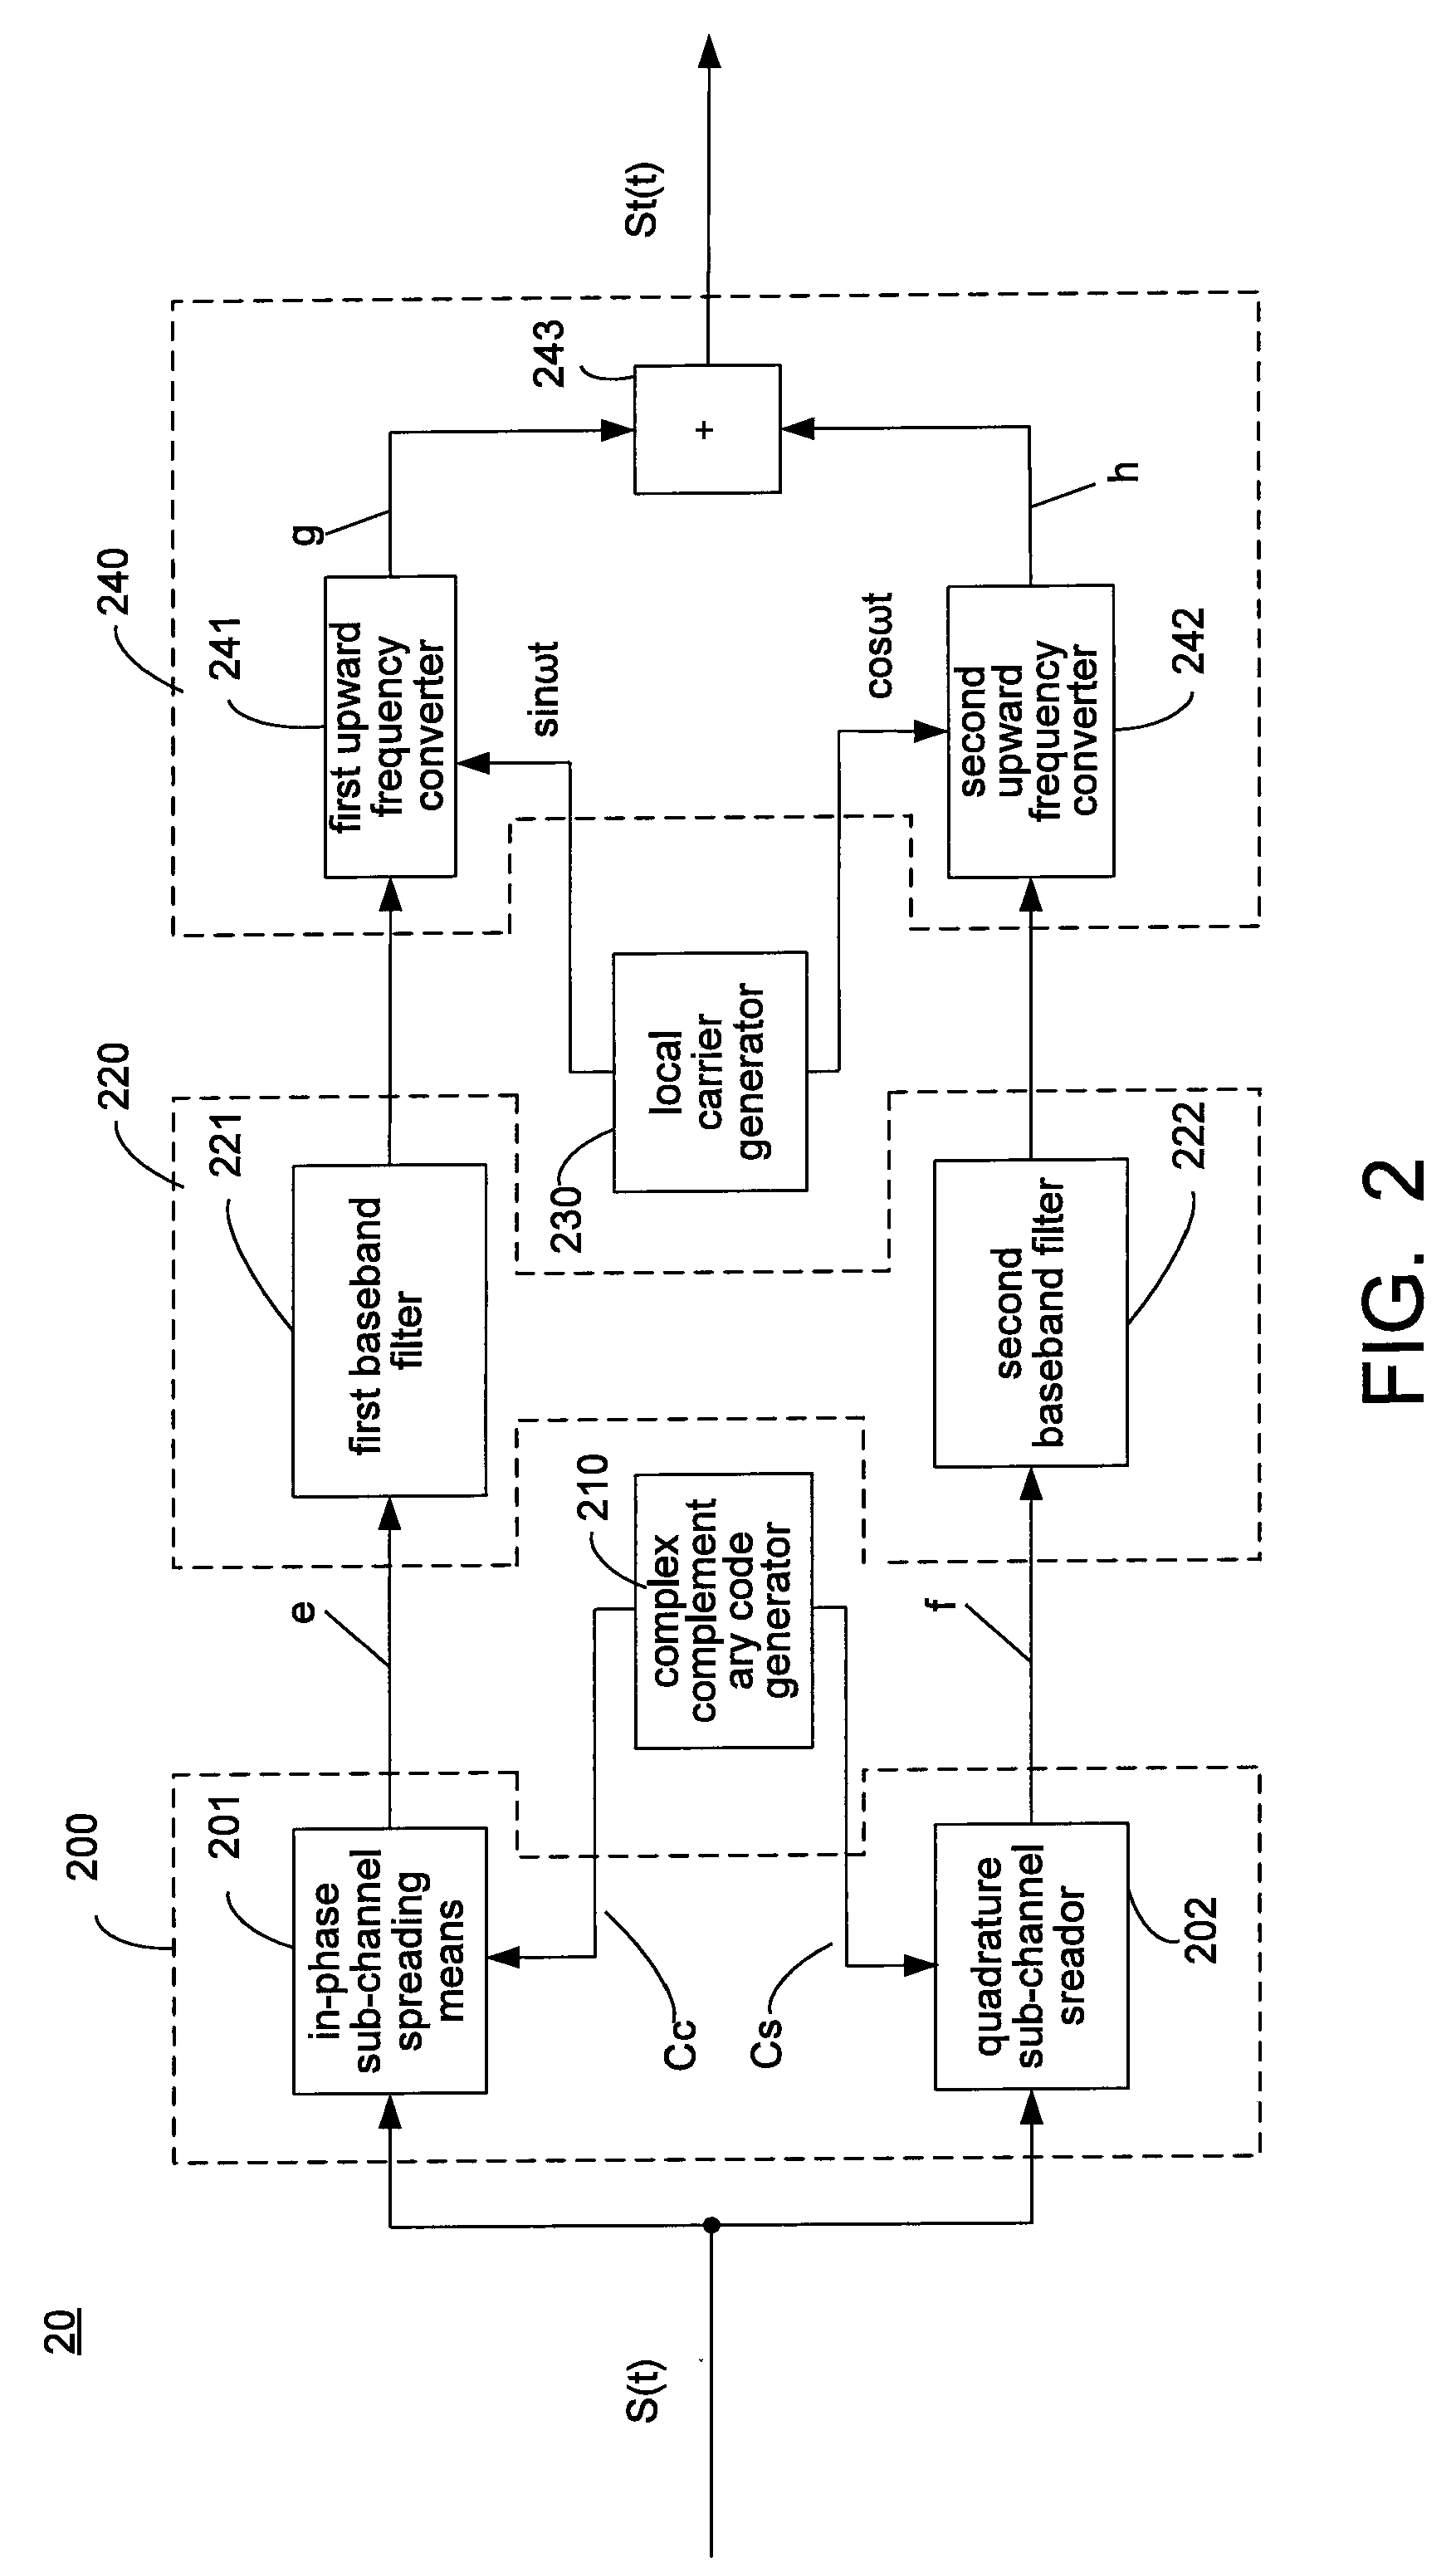 Methods and apparatus for spread spectrum modulation and demodulation